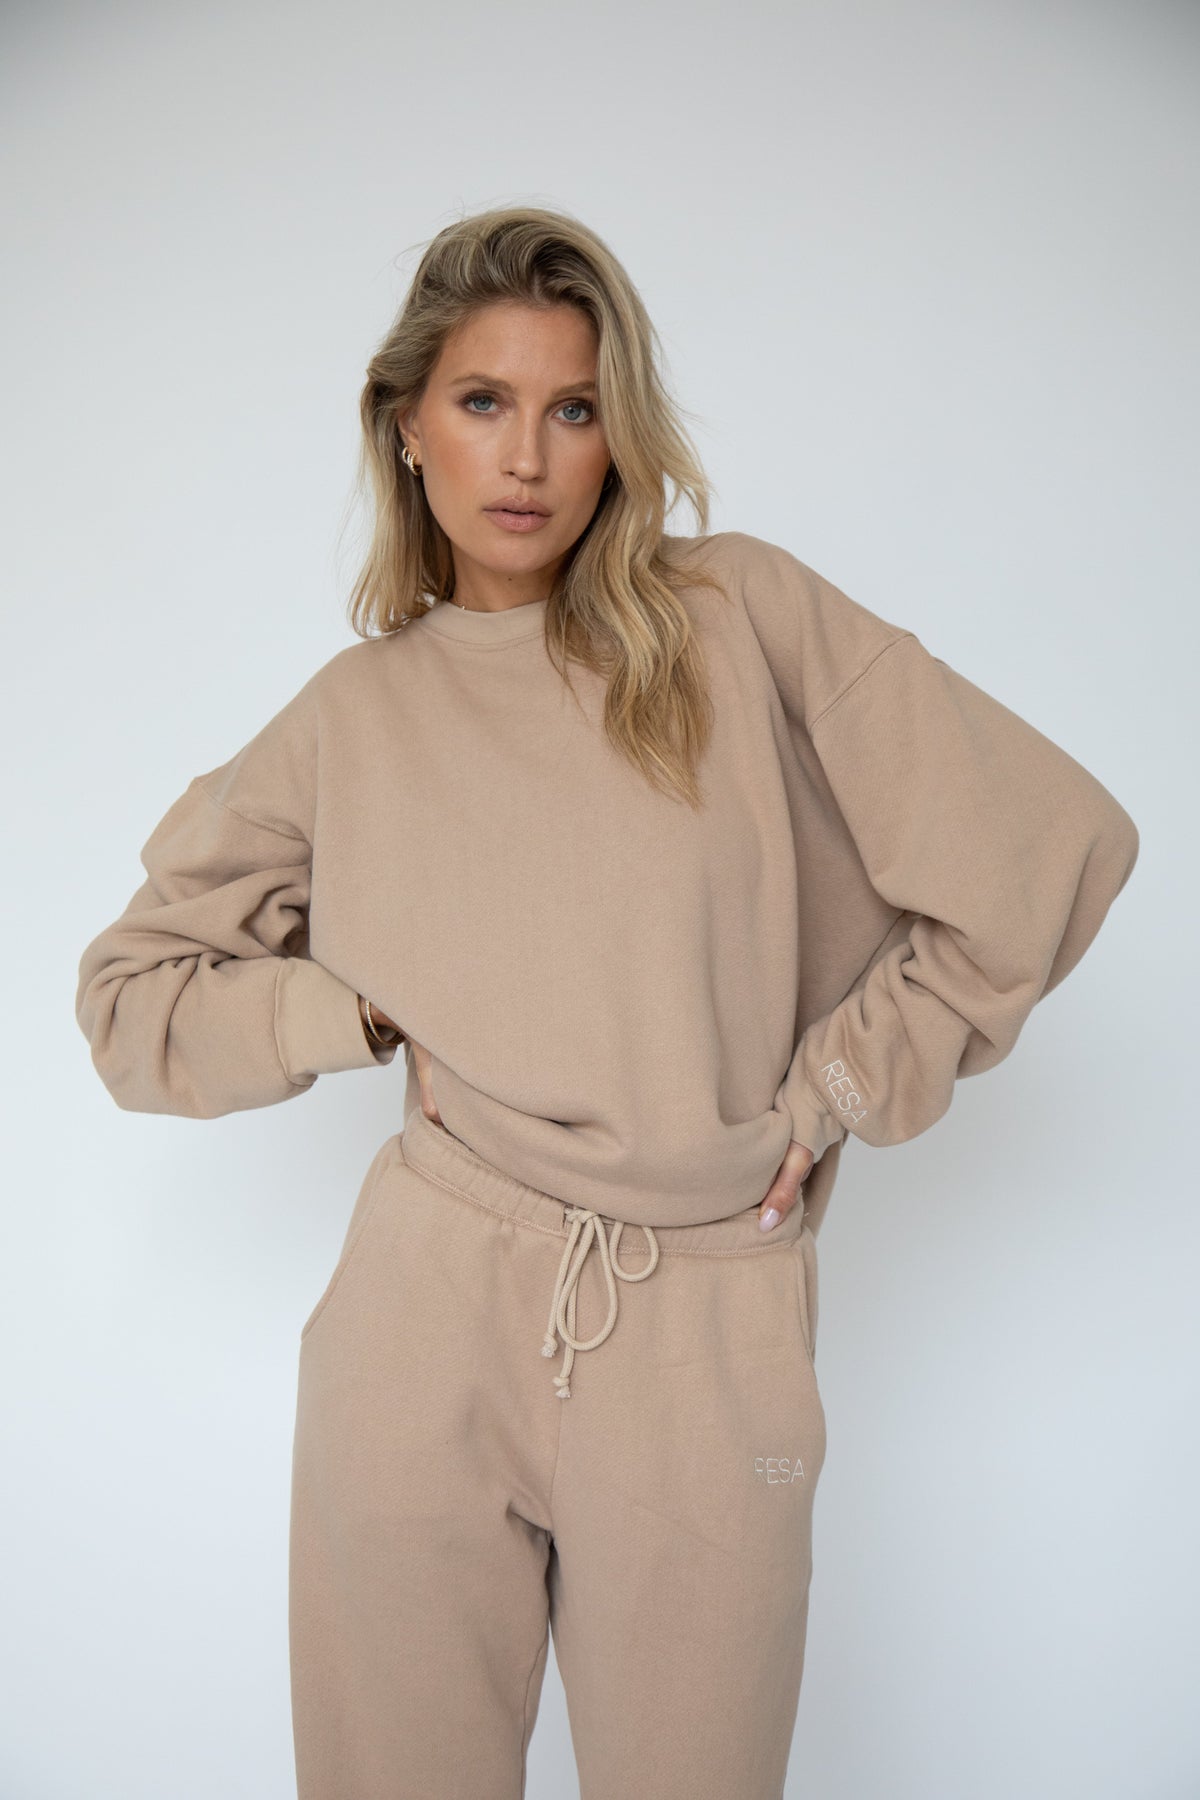 This is an image of Bodhi Sweat pants in Sand - RESA featuring a model wearing the dress